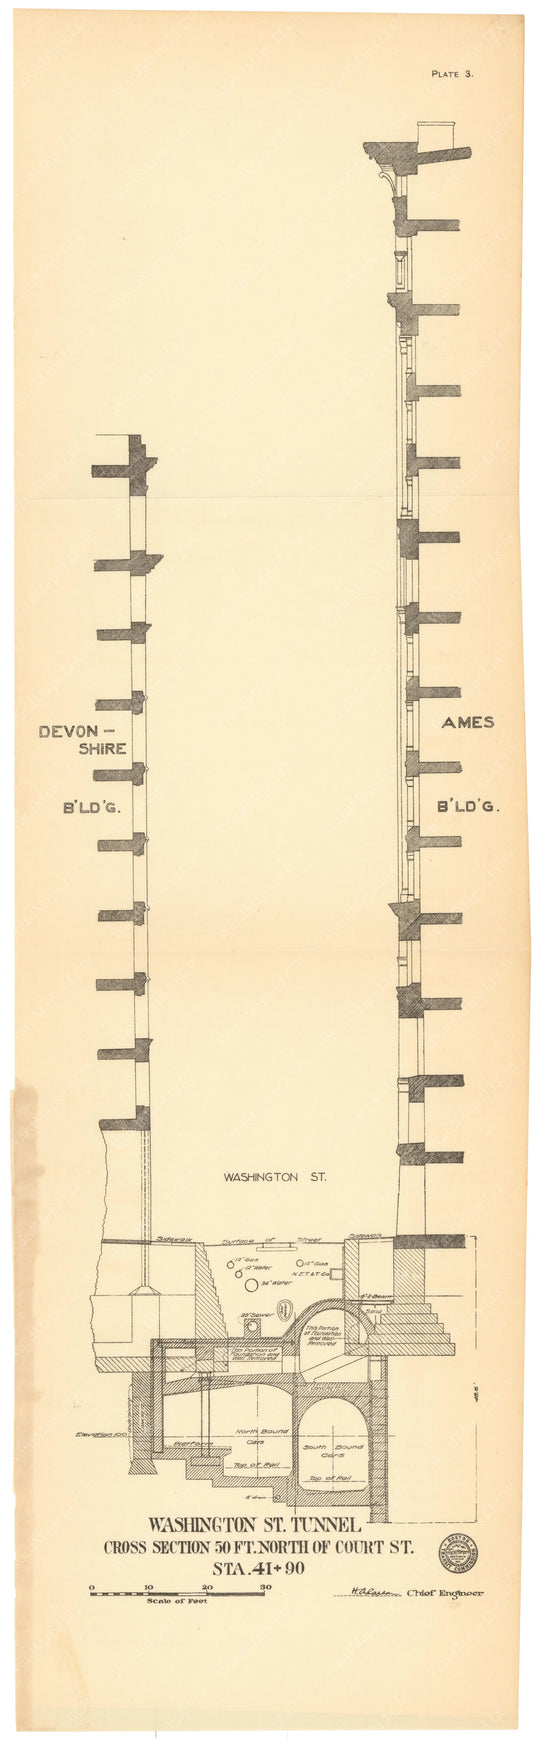 BTC Annual Report 12, 1906 Plate 03: Tunnel Cross Section at Ames Building